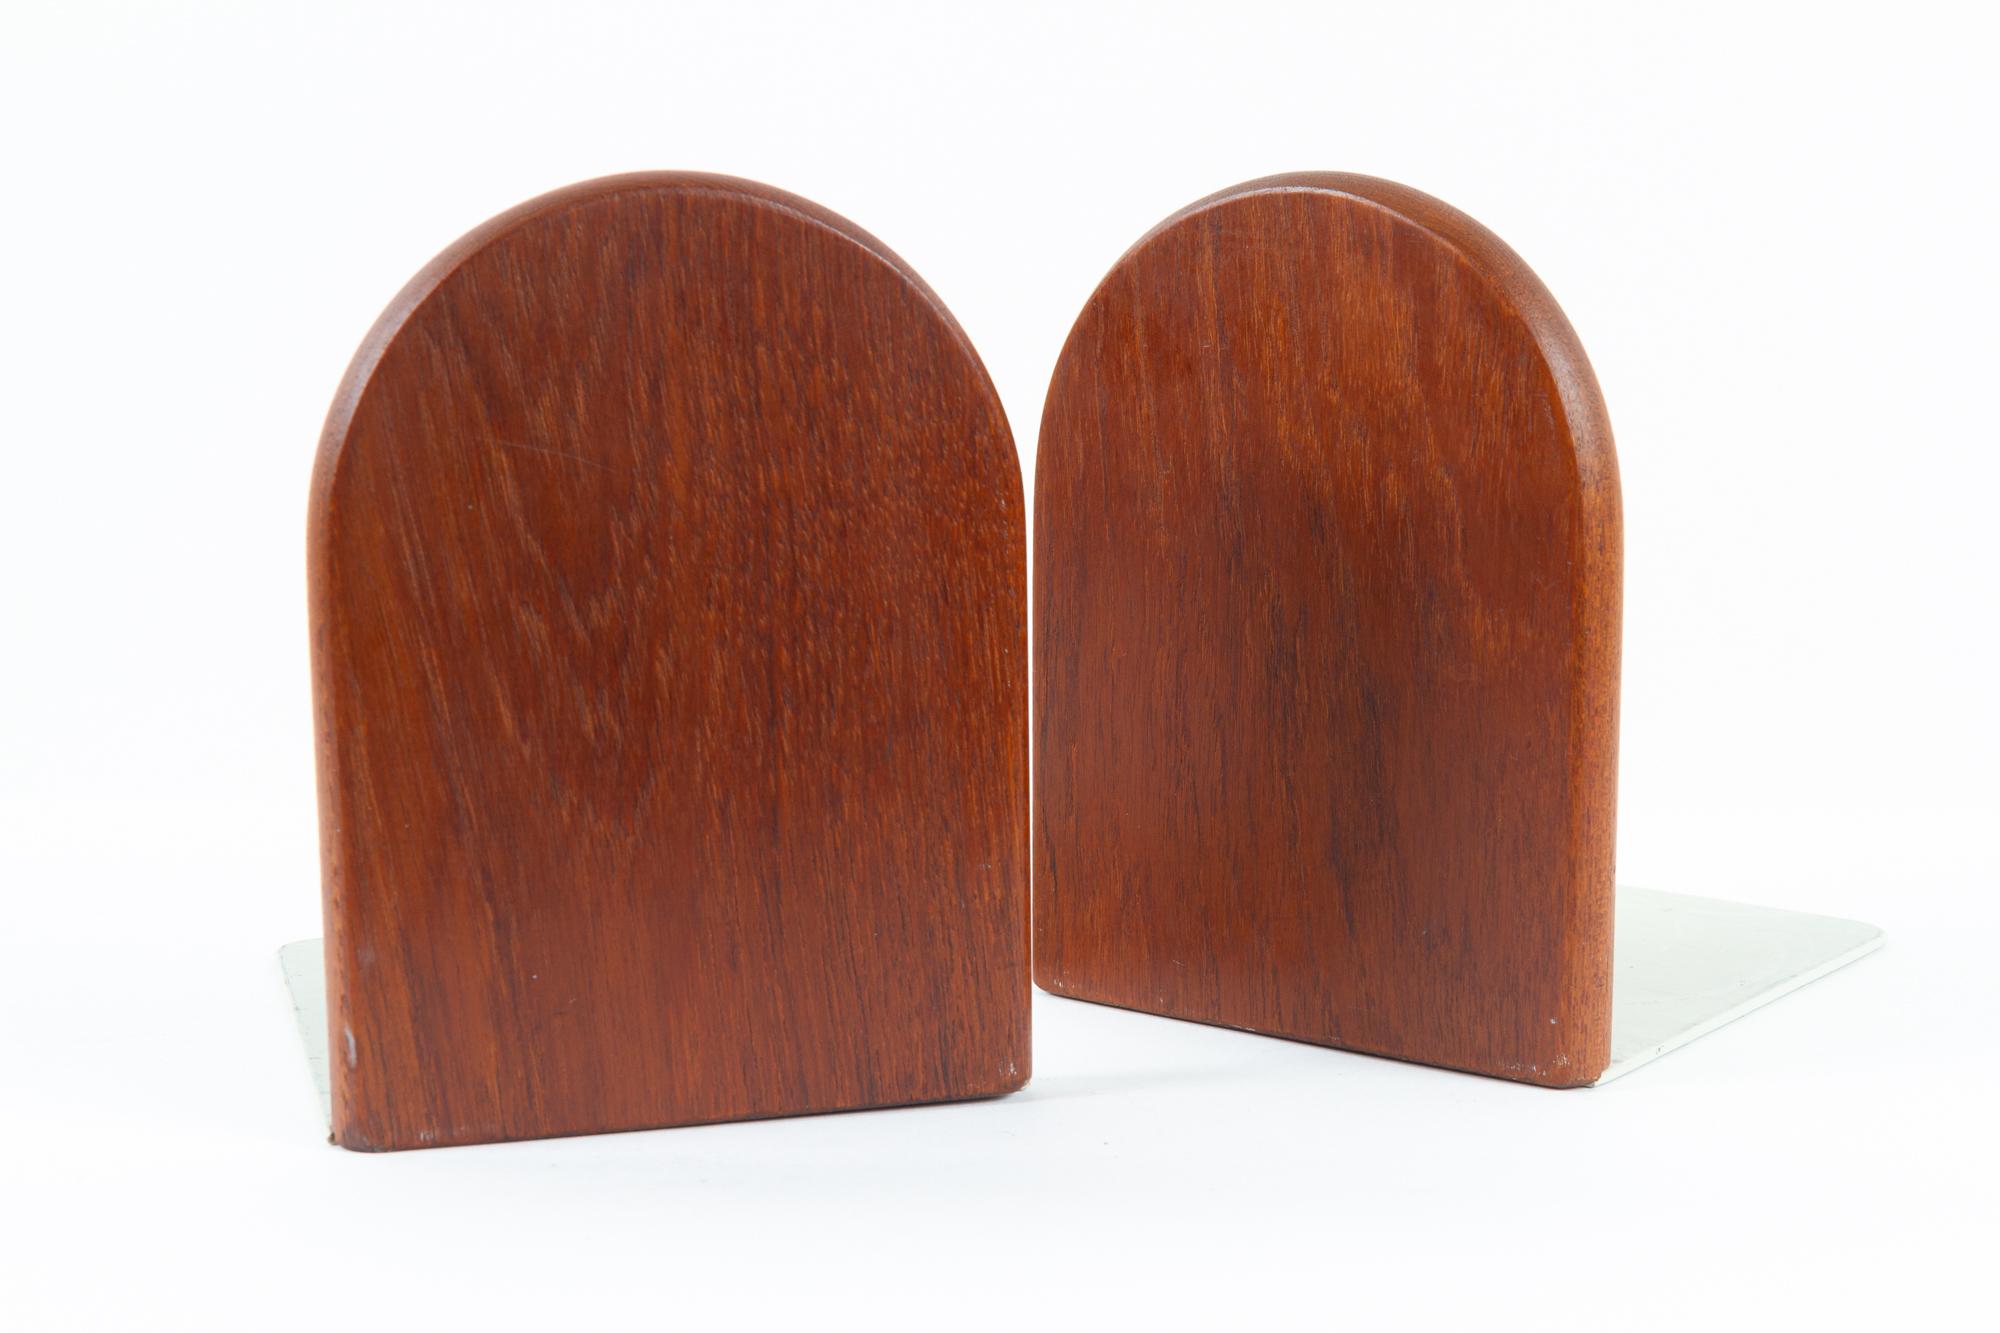 Vintage Danish teak bookends 1960s, Set of 2
Pair of Danish Mid-Century Modern bookends in solid teak with metal base.
Very good original condition. Ready to support.